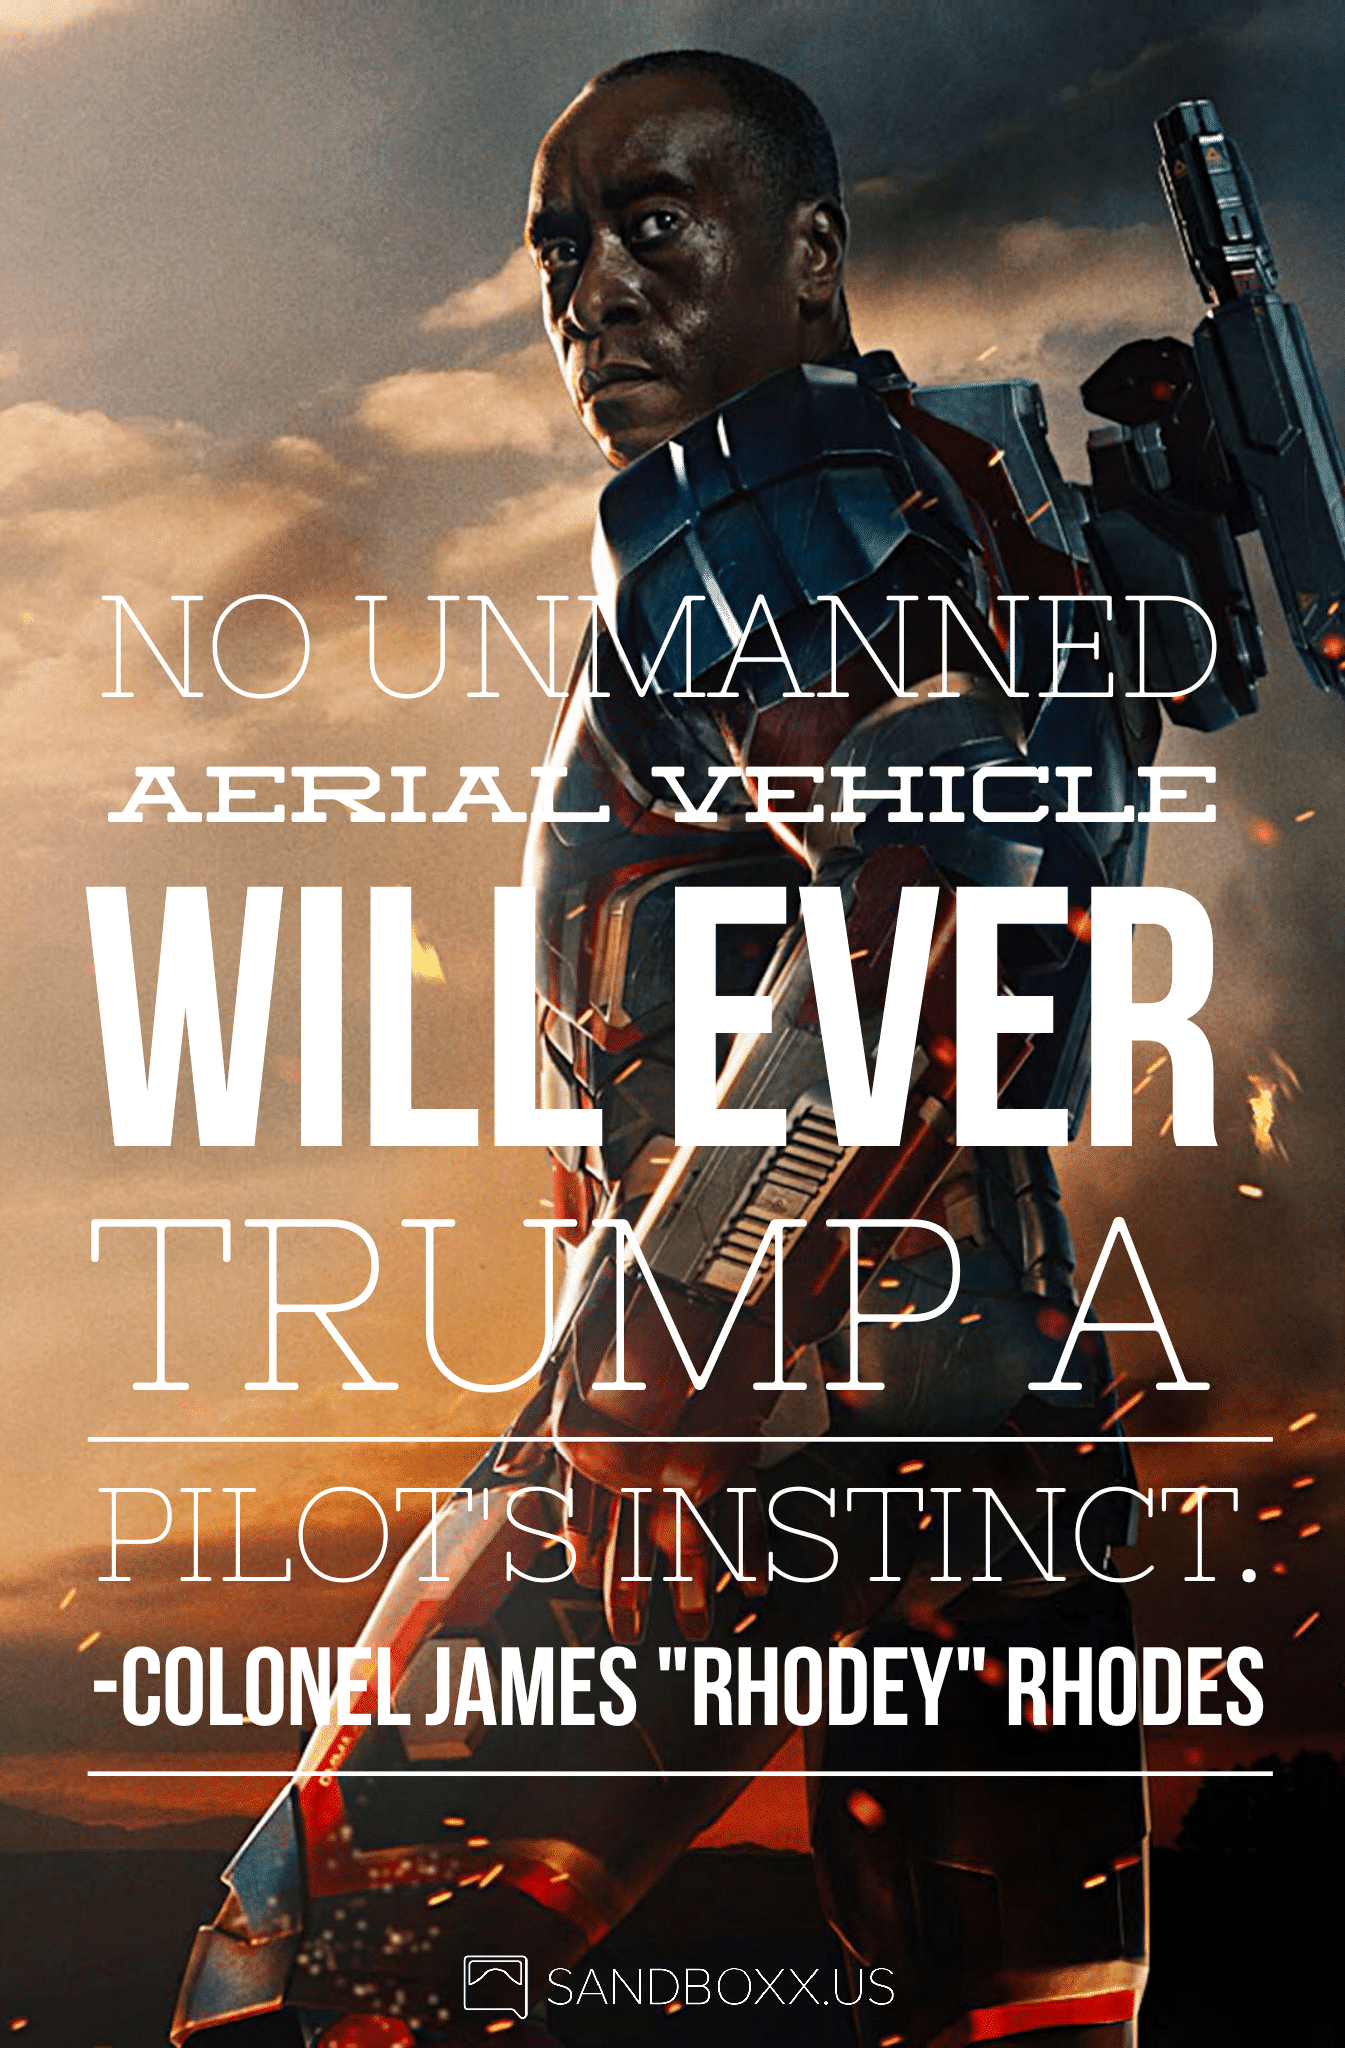 Colonel James "Rhodey" Rhodes opines on the future of air combat by suggesting that "no unmanned aerial vehicle will ever trump a pilot's instinct."